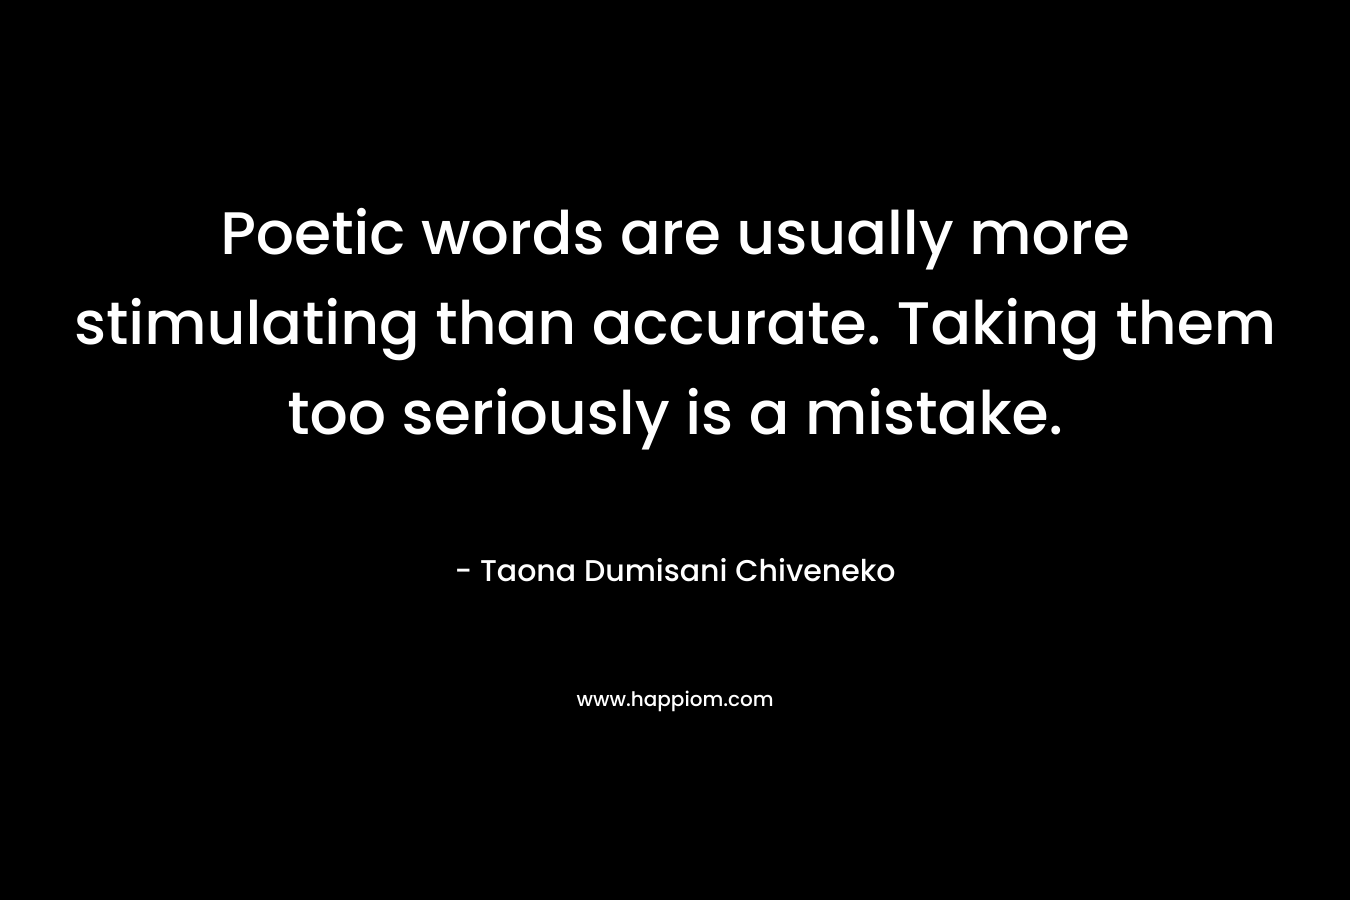 Poetic words are usually more stimulating than accurate. Taking them too seriously is a mistake.